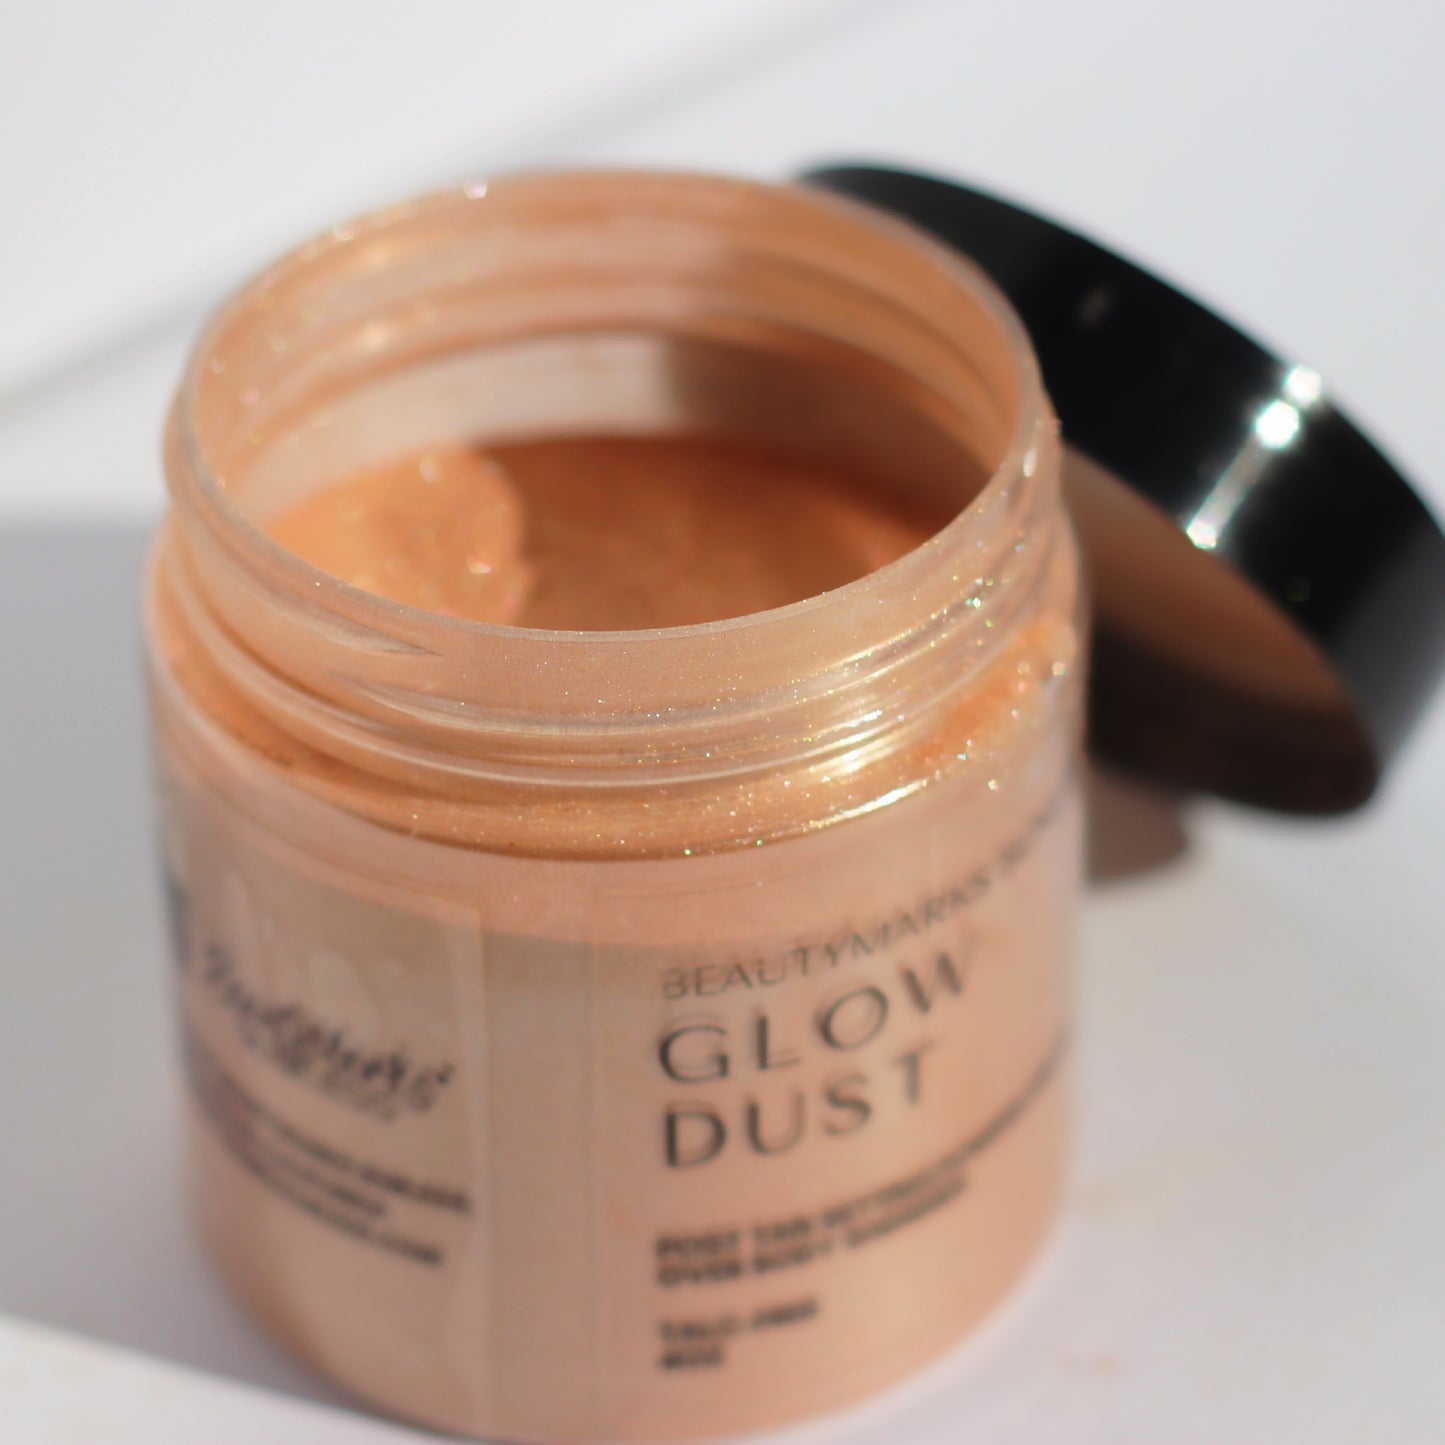 Glow Dust: Post Tan Setting Powder and All Over Body Shimmer